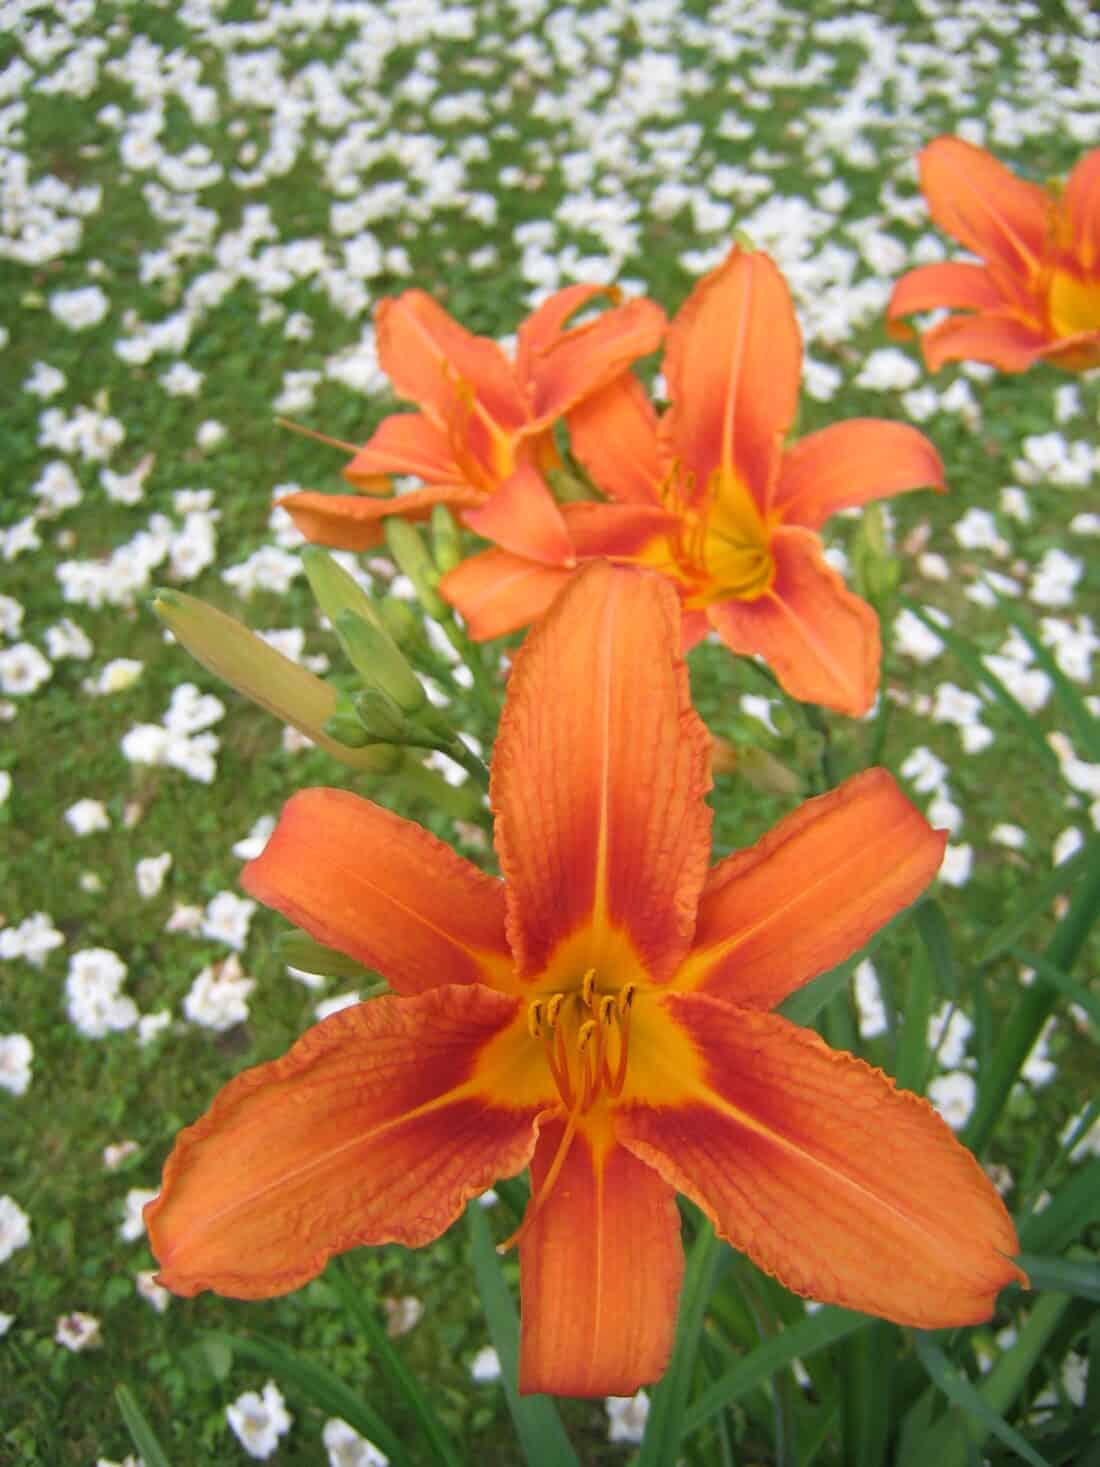 Close-up of vibrant orange lilies in full bloom. The flowers have large, velvety petals with a slightly darker orange center. The background features scattered white petals on green grass, creating a visually appealing contrast with the bright lilies, perfect for a peaceful yoga garden setting.